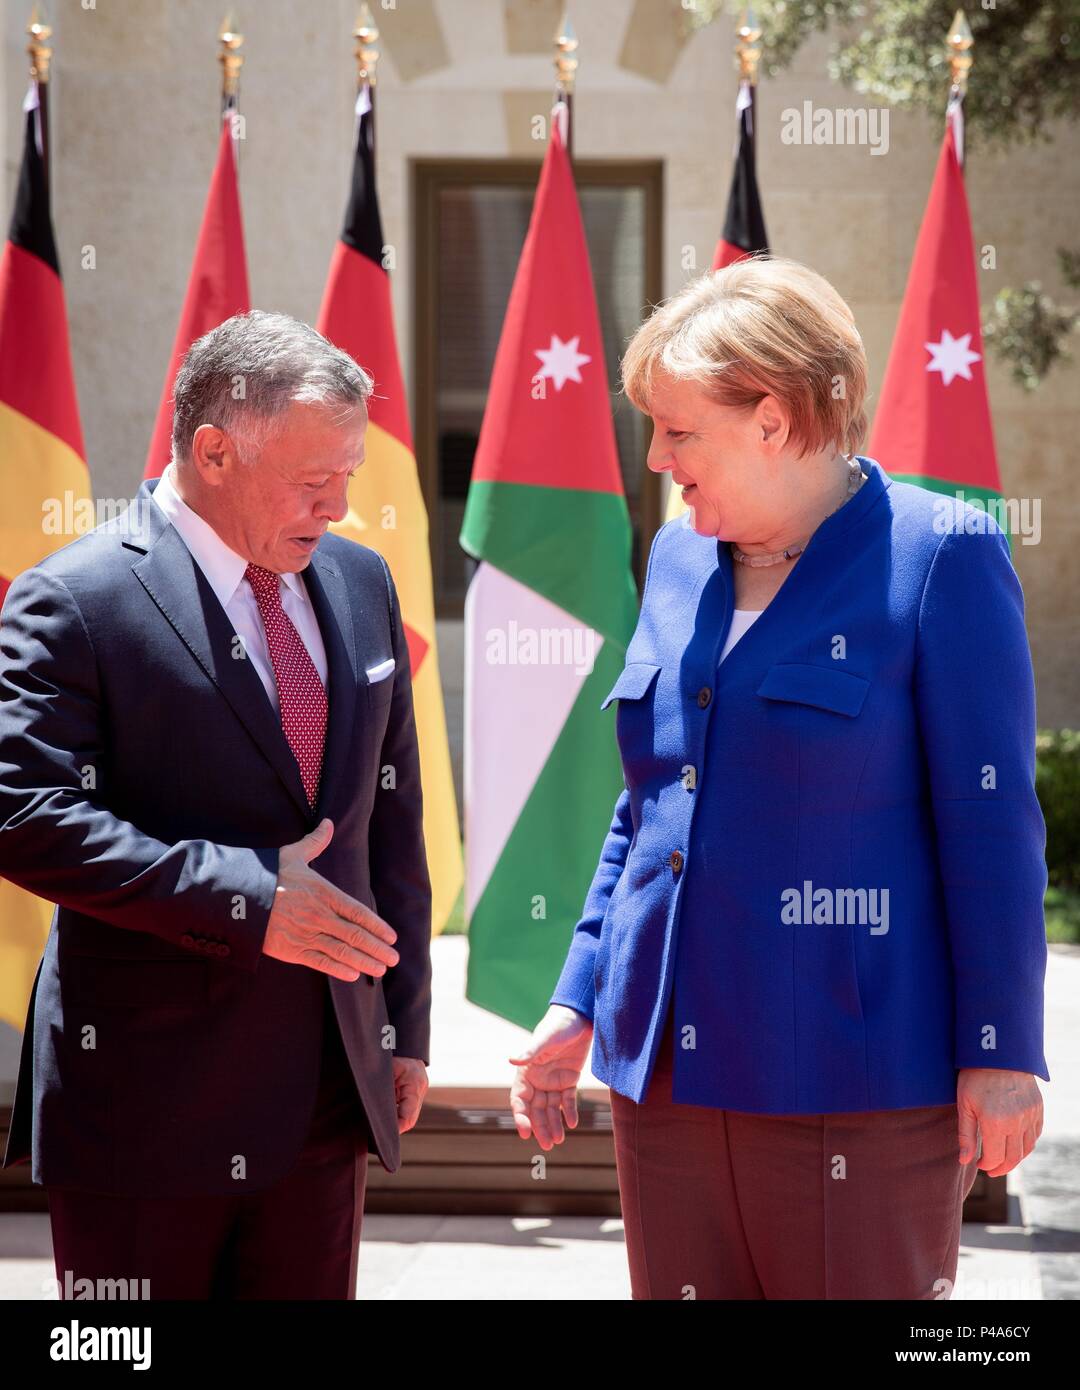 Amman, Jordan. 21st June, 2018. German Chancellor from the Christian Democratic Union (CDU), Angela Merkel, being greeted by the King of Jordan Abdullah II. in his palace. The Chancellor will also be visiting Lebanon on her travels. Credit: Kay Nietfeld/dpa/Alamy Live News Stock Photo